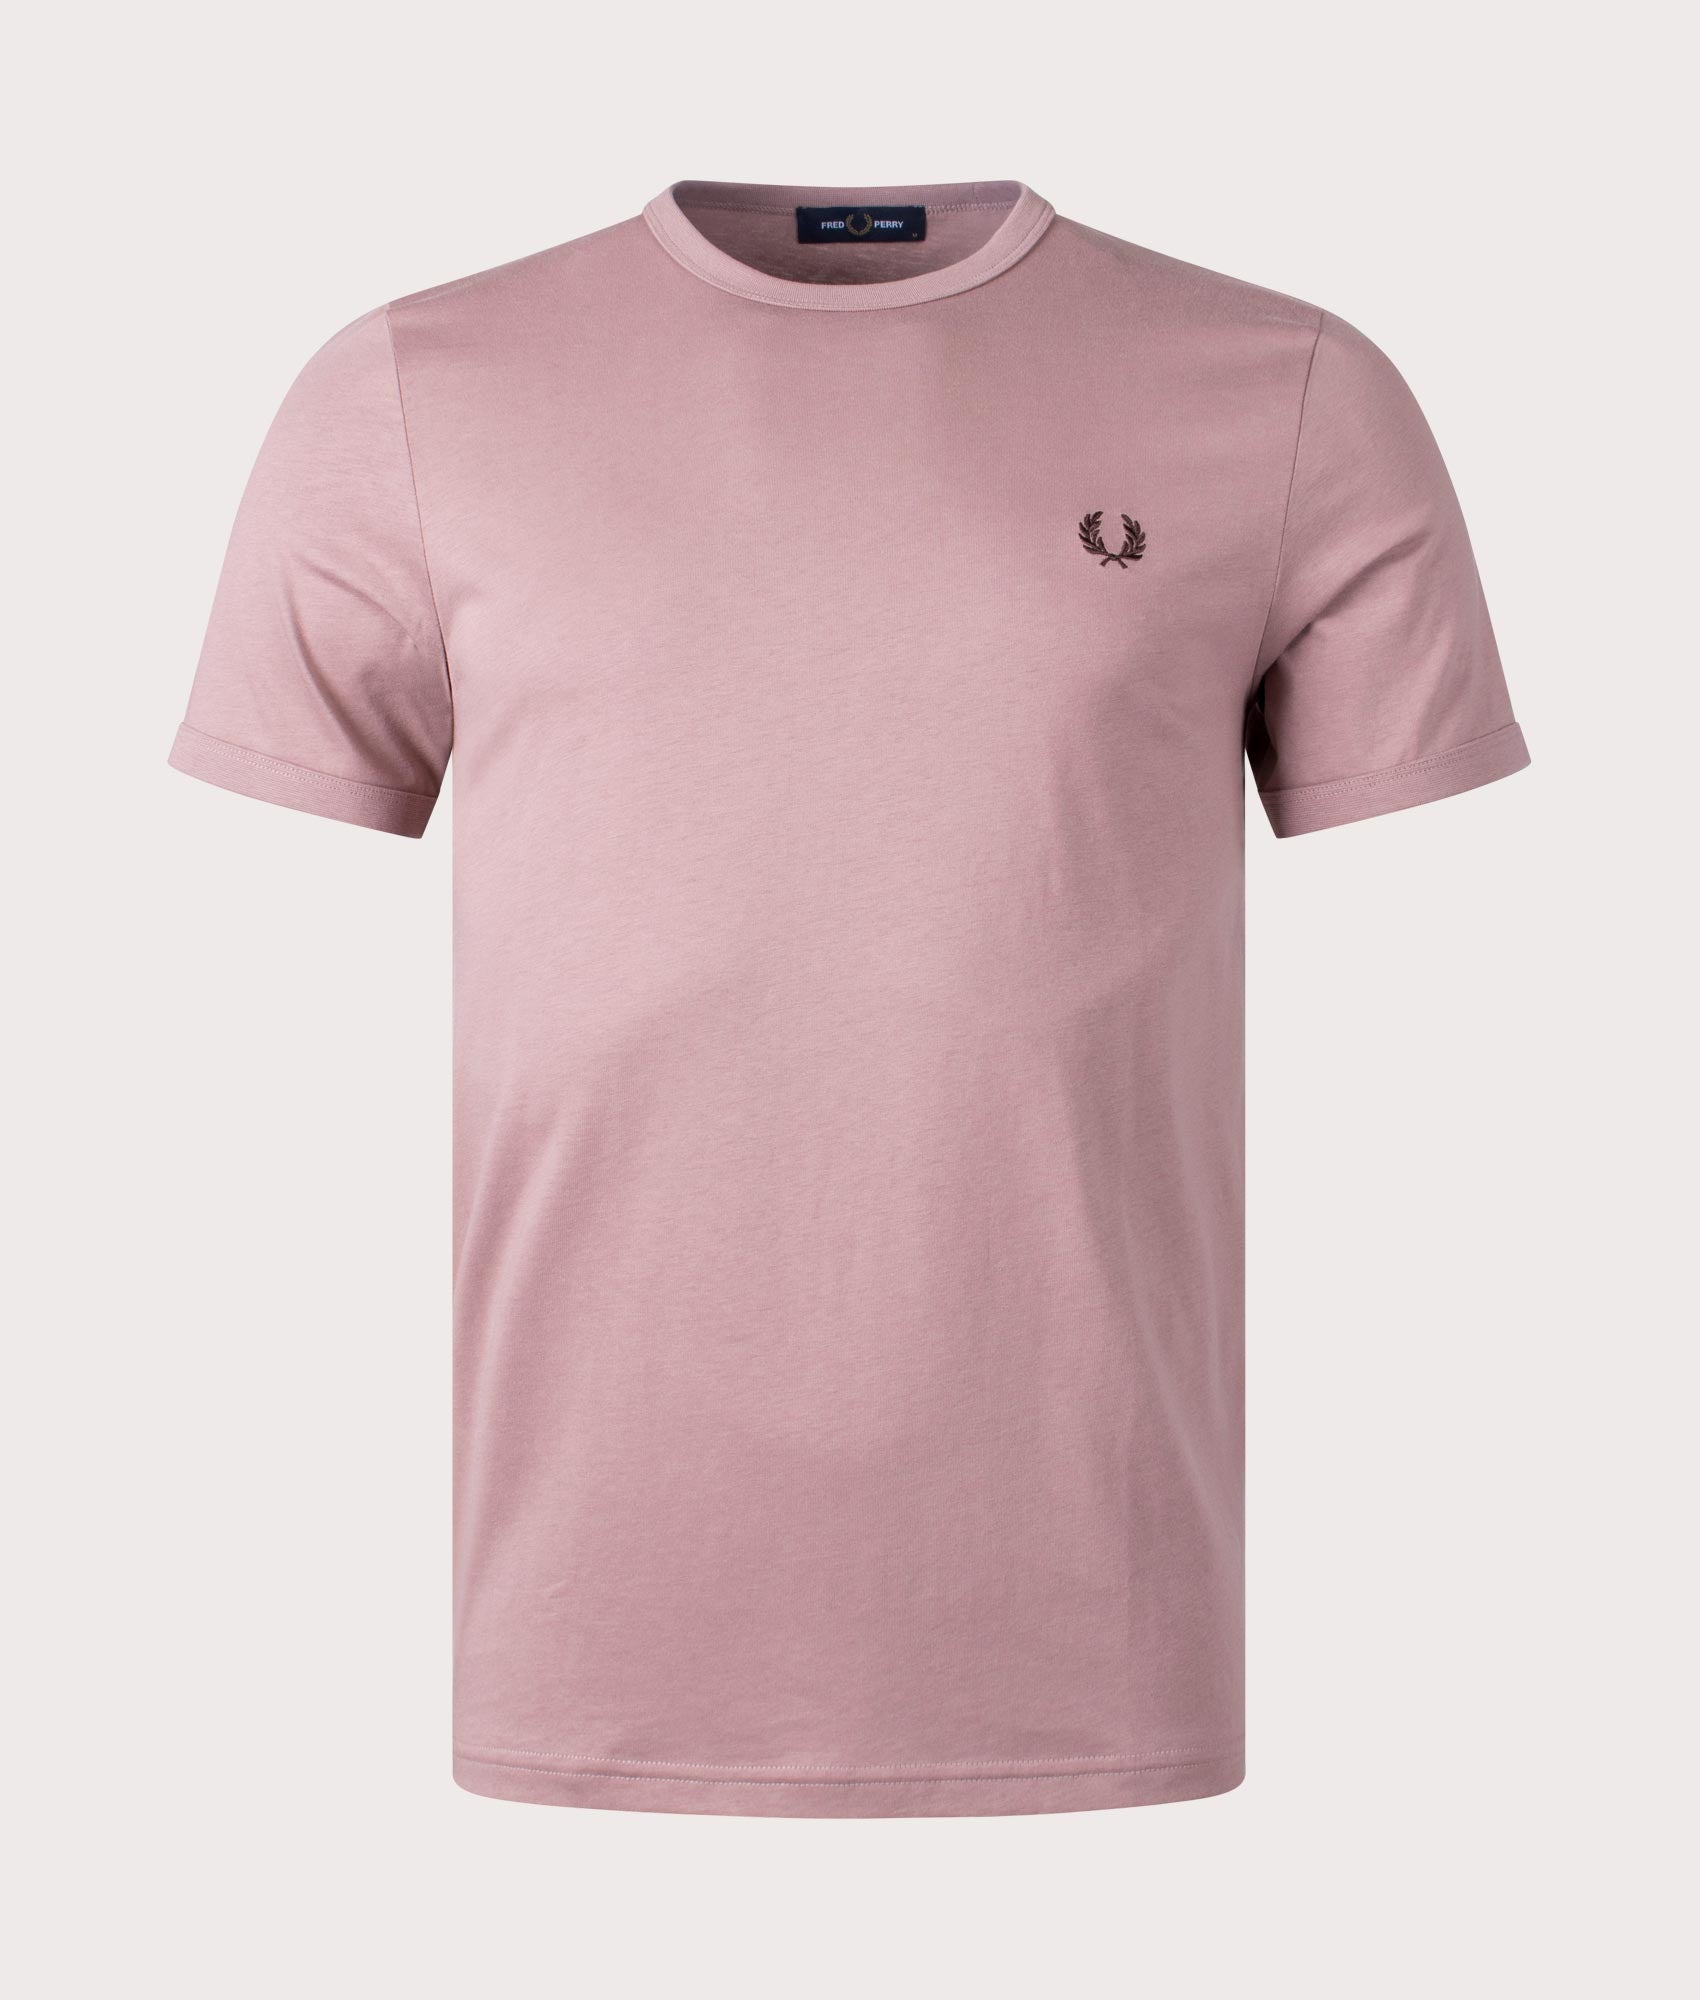 Fred Perry Mens Ringer T-Shirt - Colour: S52 Dark Pink - Size: XXL